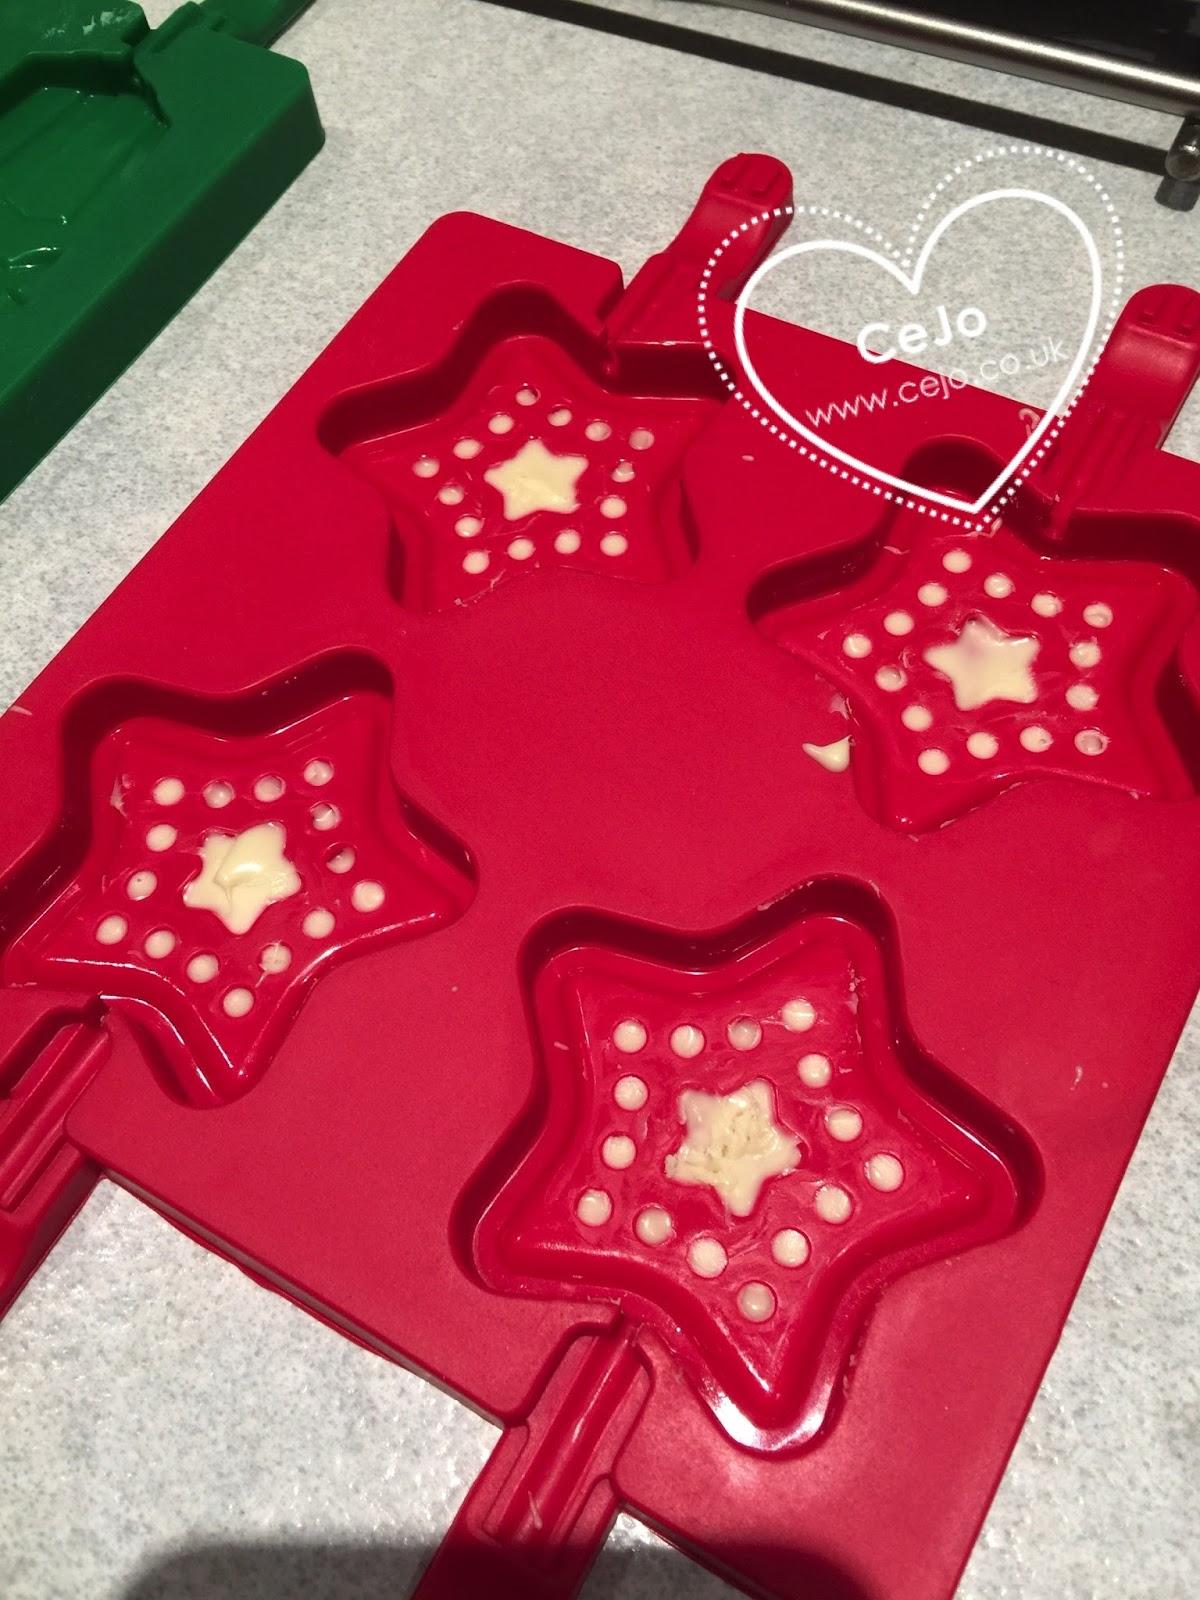 lakeland star lolly mould